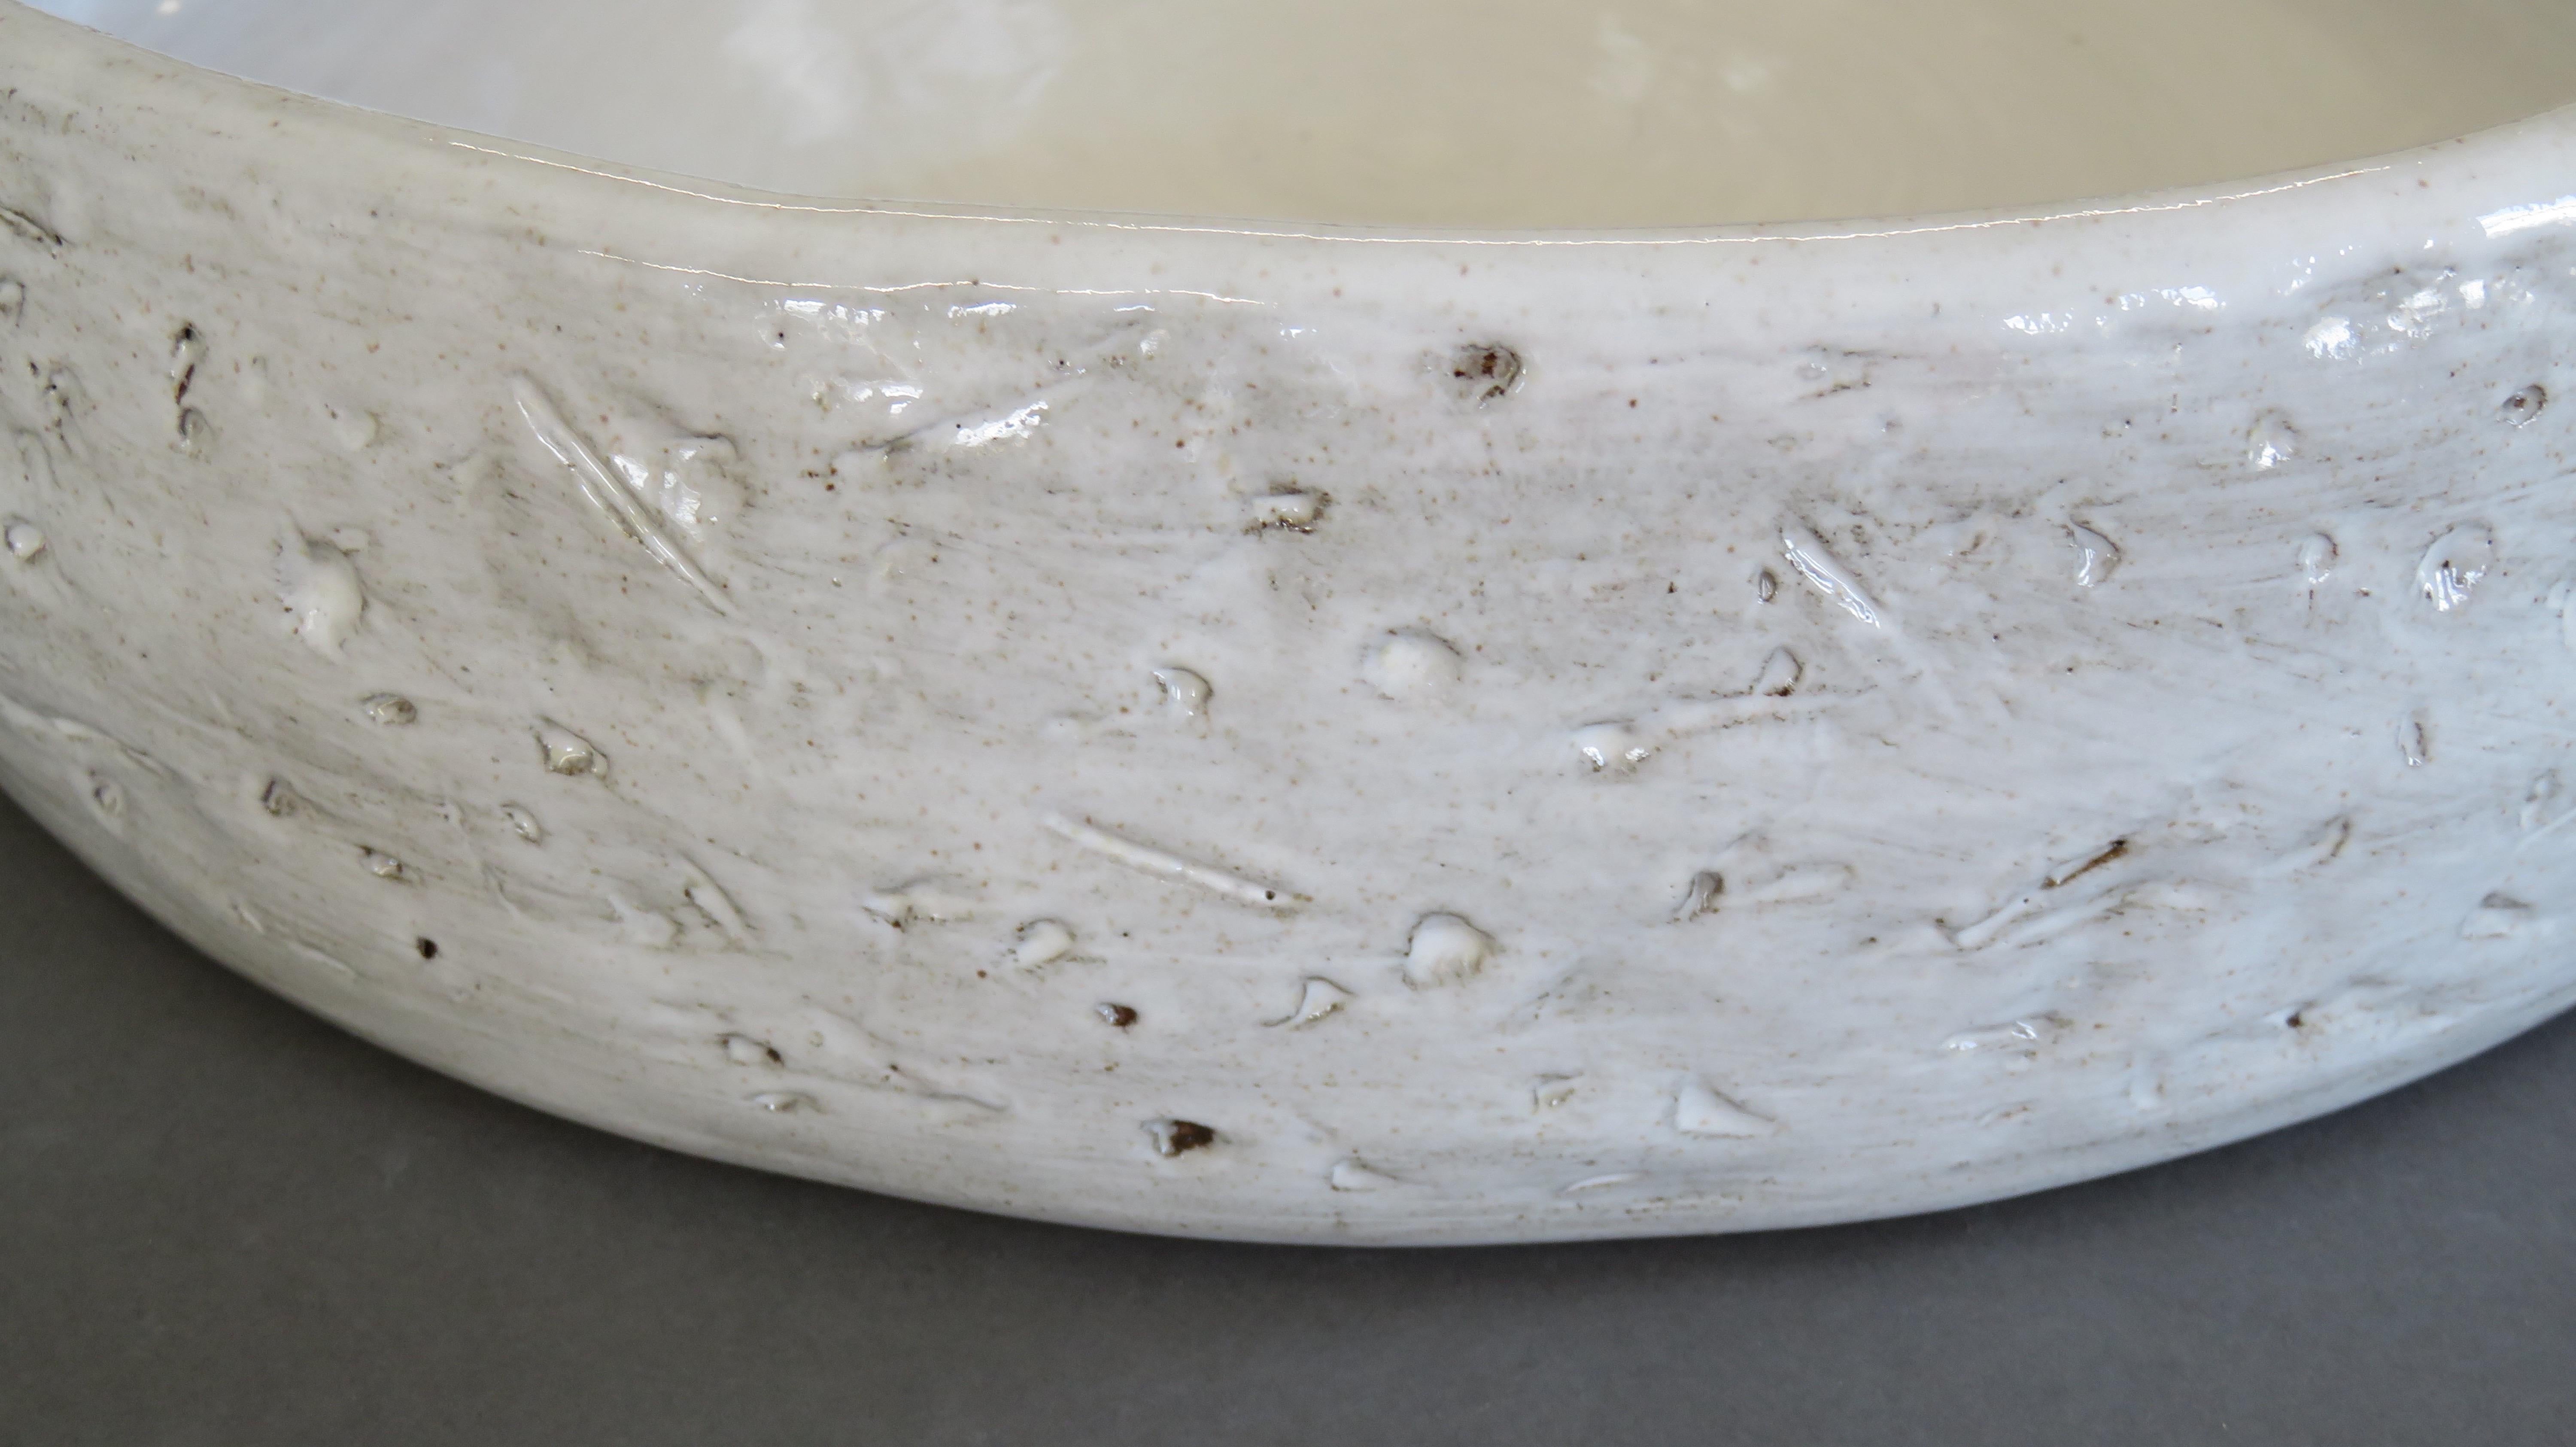 Hand-Carved Large Ceramic Serving Bowl, Hand-Marked Exterior With White Glaze, Hand Built